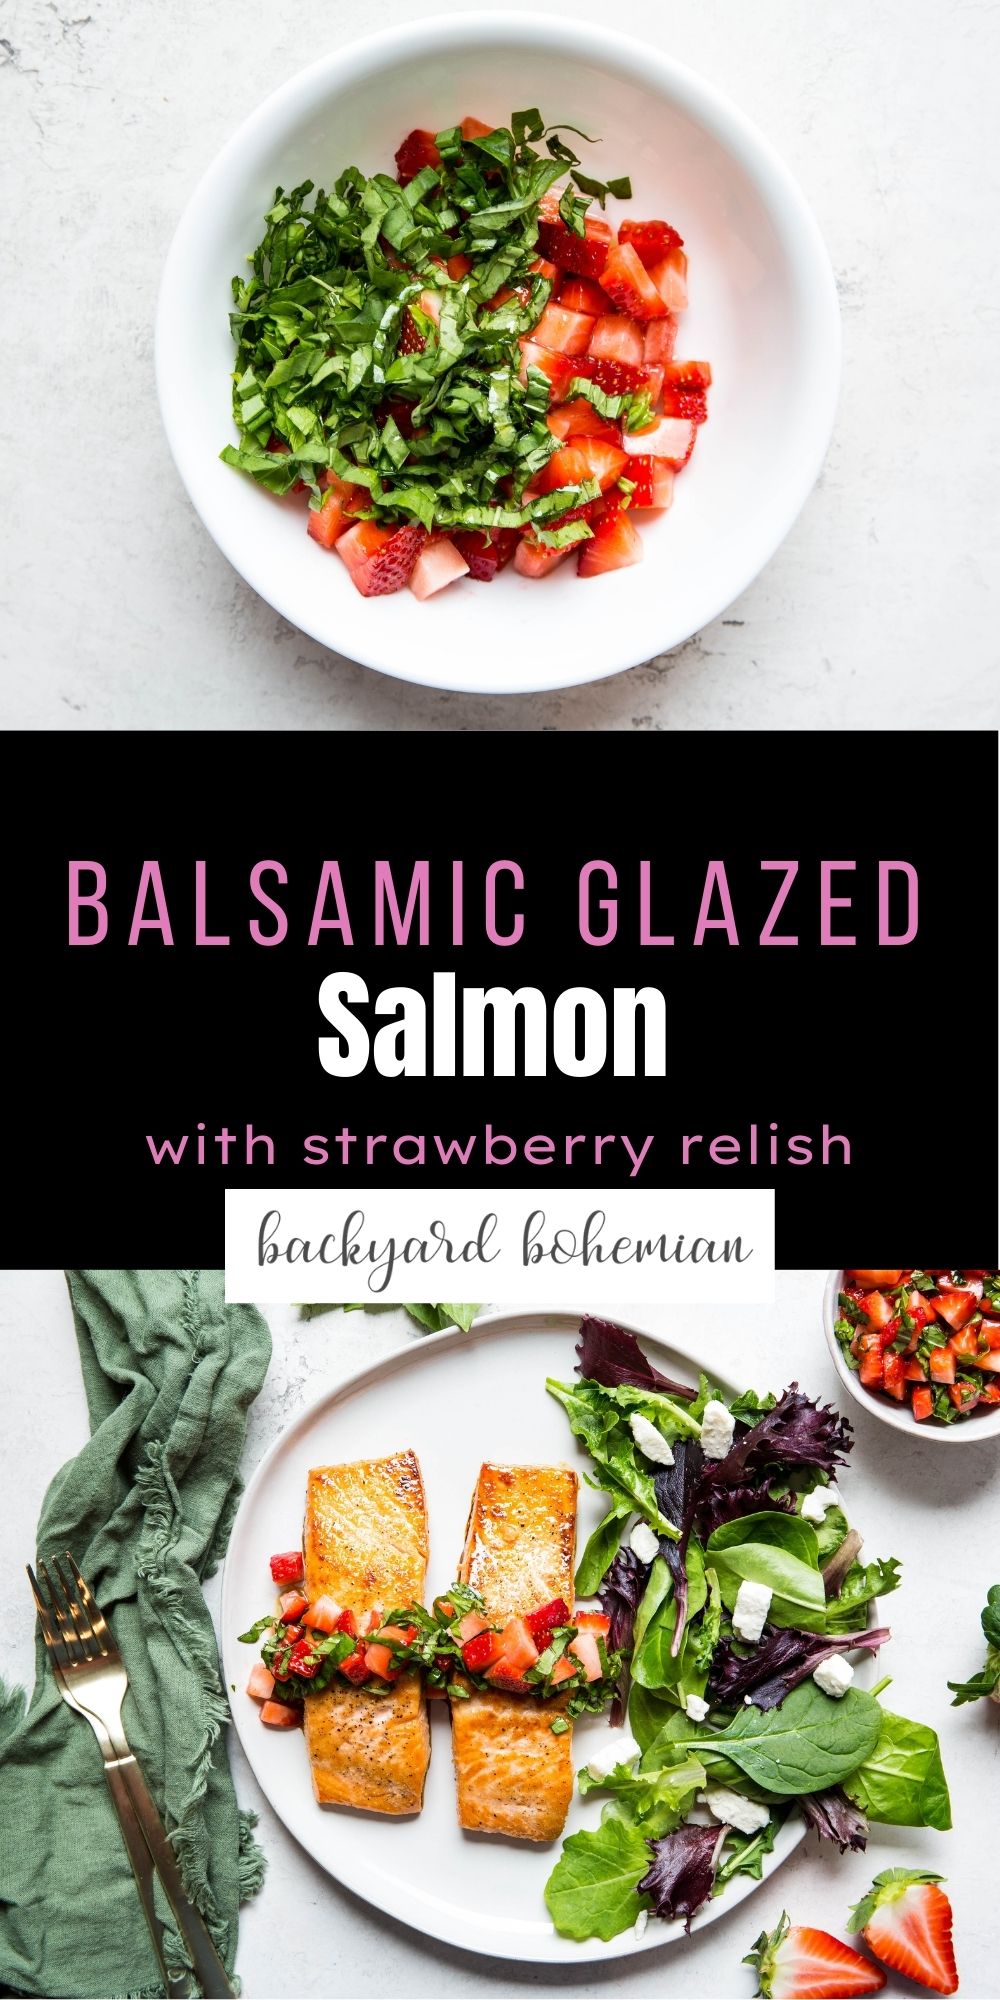 Honey Balsamic Glazed Salmon With Strawberry Relish is packed with fresh flavors and is such an easy 30 minute meal! The salmon filets are perfectly seared to juicy, tender perfection. This easy salmon recipe will have you hooked! via @foodhussy